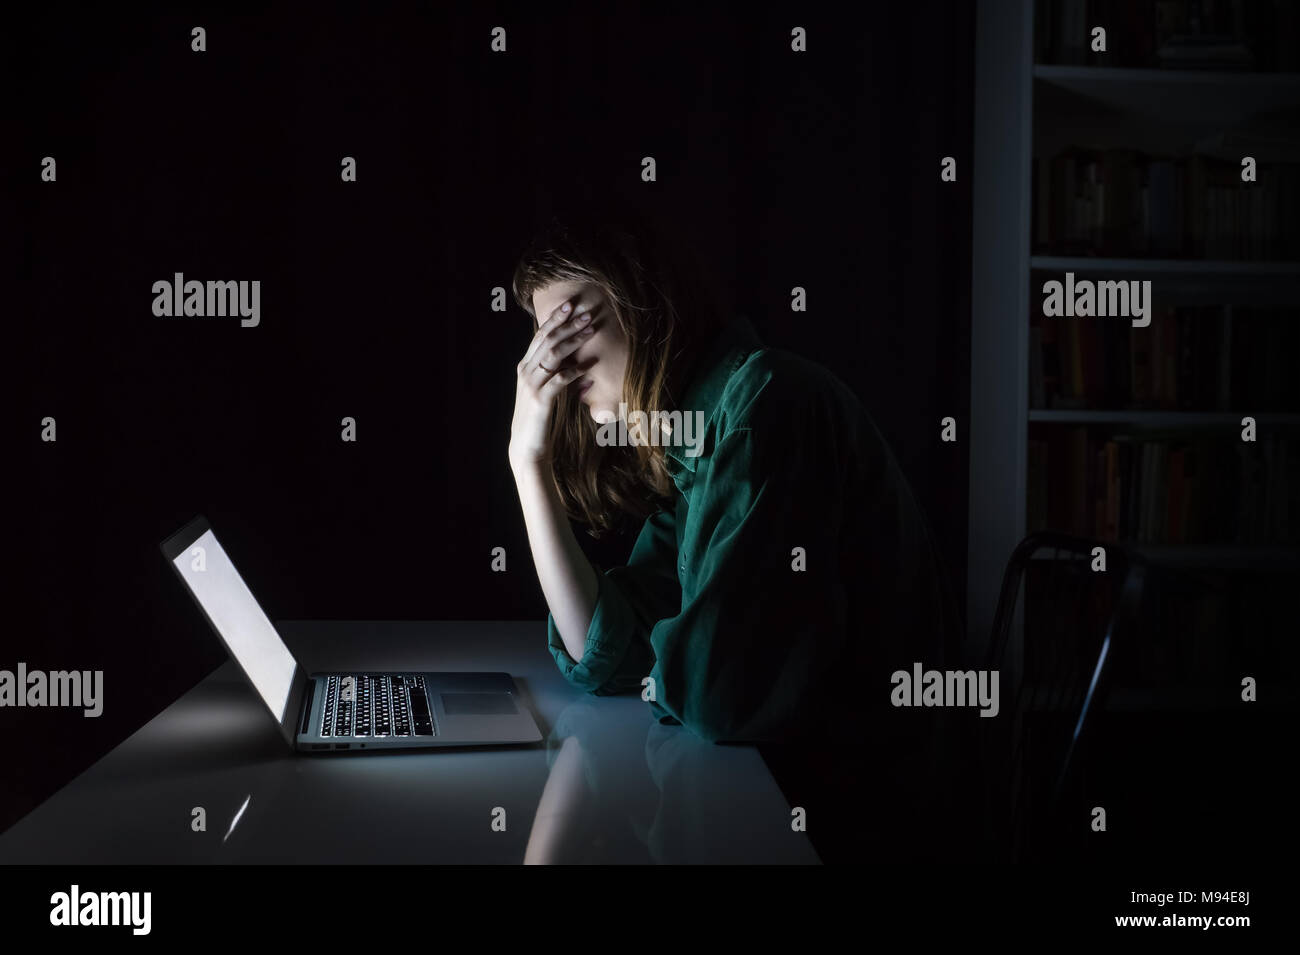 Tired and exhausted young woman hides eyes with hand at laptop pc late in the evening. Portrait of depressed female student or worker sitting in front Stock Photo